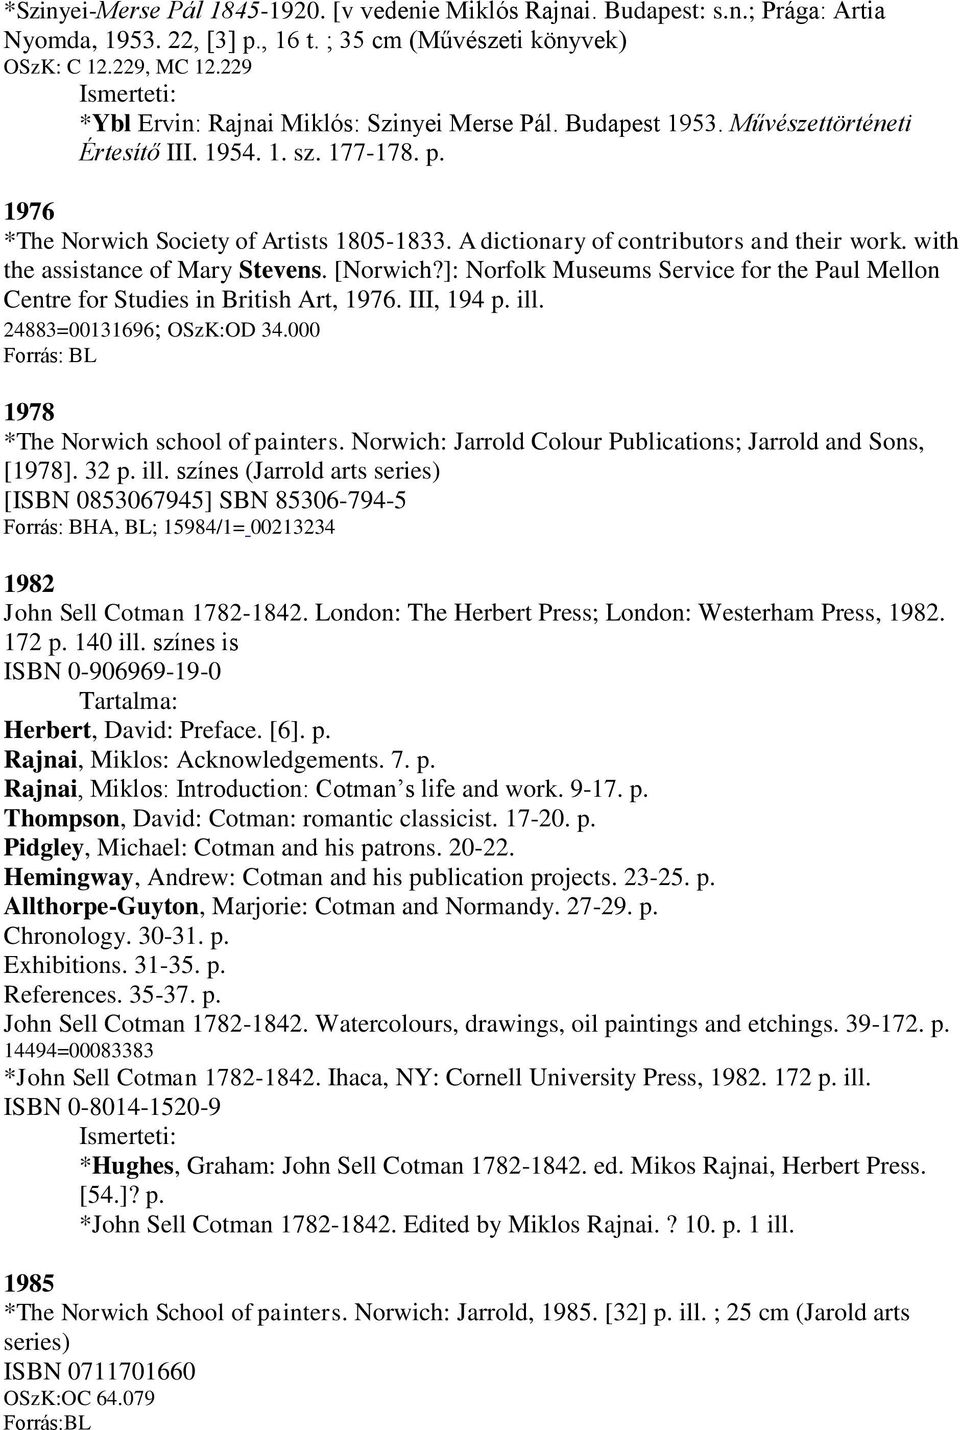 A dictionary of contributors and their work. with the assistance of Mary Stevens. [Norwich?]: Norfolk Museums Service for the Paul Mellon Centre for Studies in British Art, 1976. III, 194 p. ill.